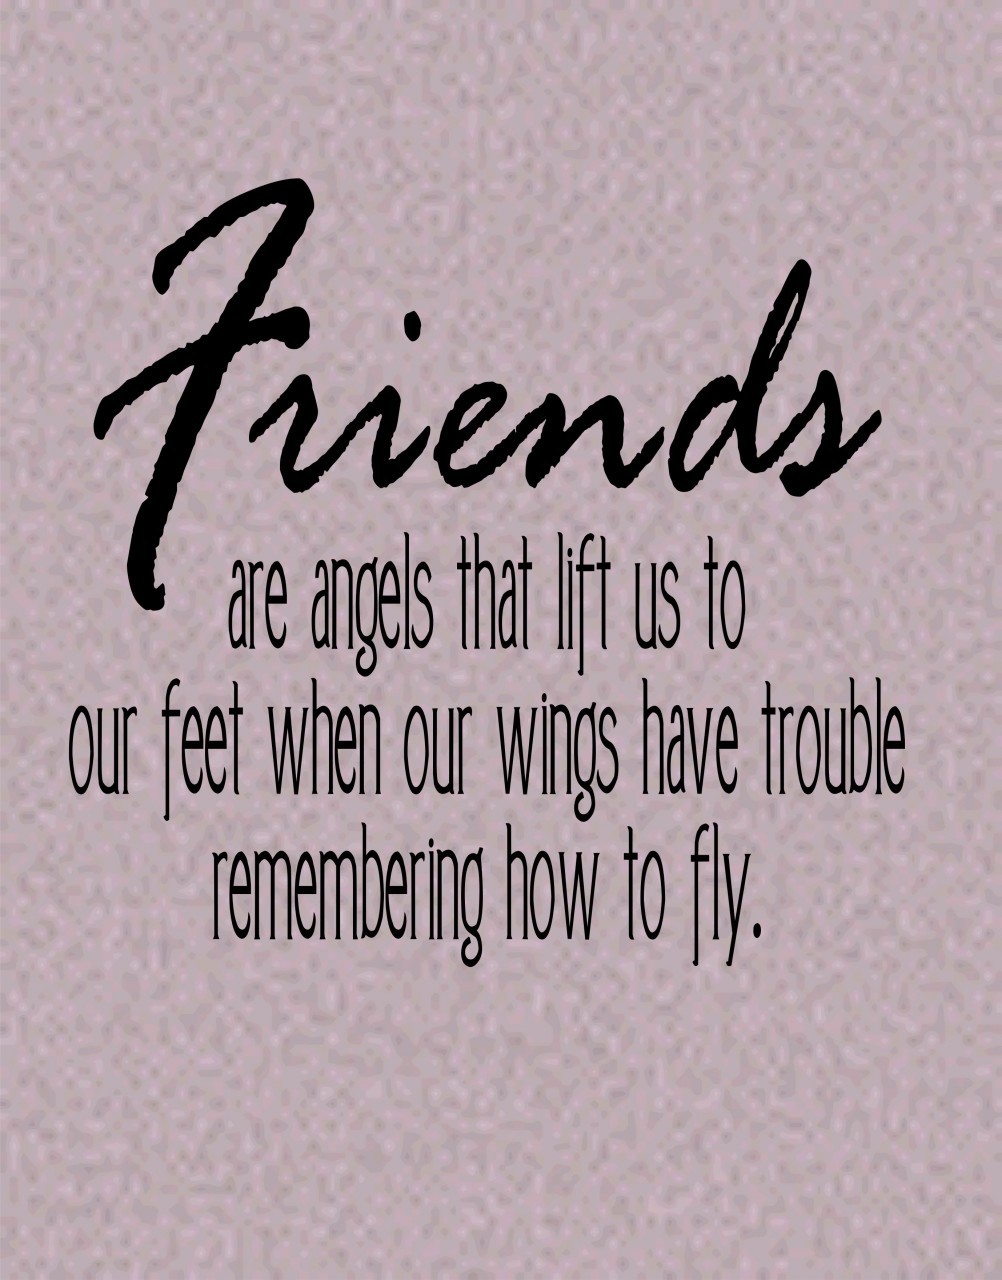 Friends are angels who lift us to our feet when our wings have trouble remembering how to fly.